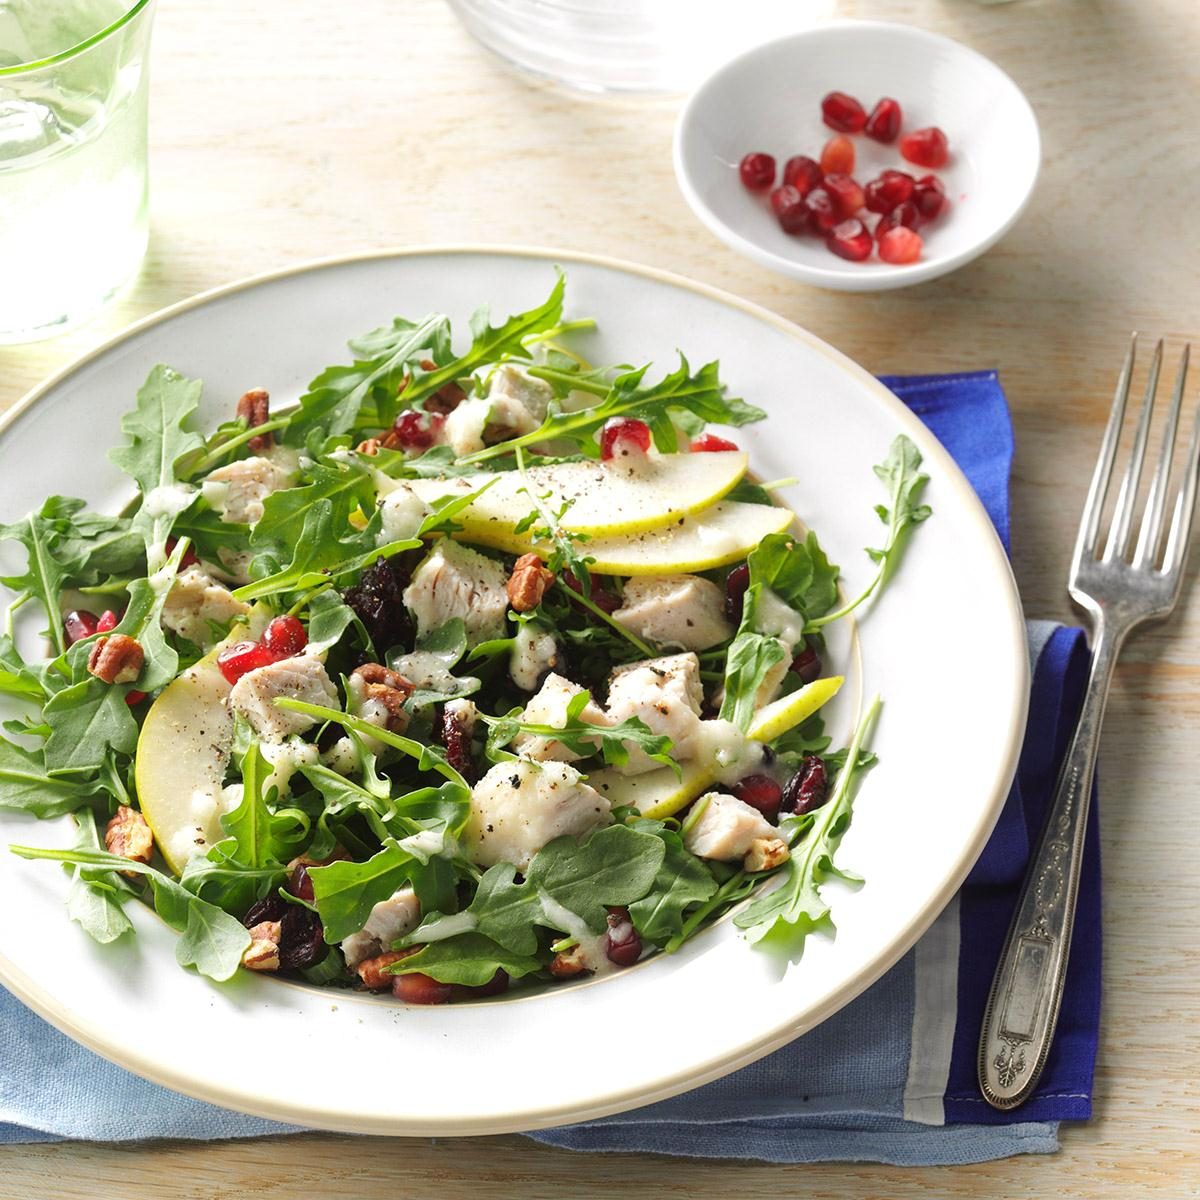 Turkey Spinach Salad with Pear Dressing